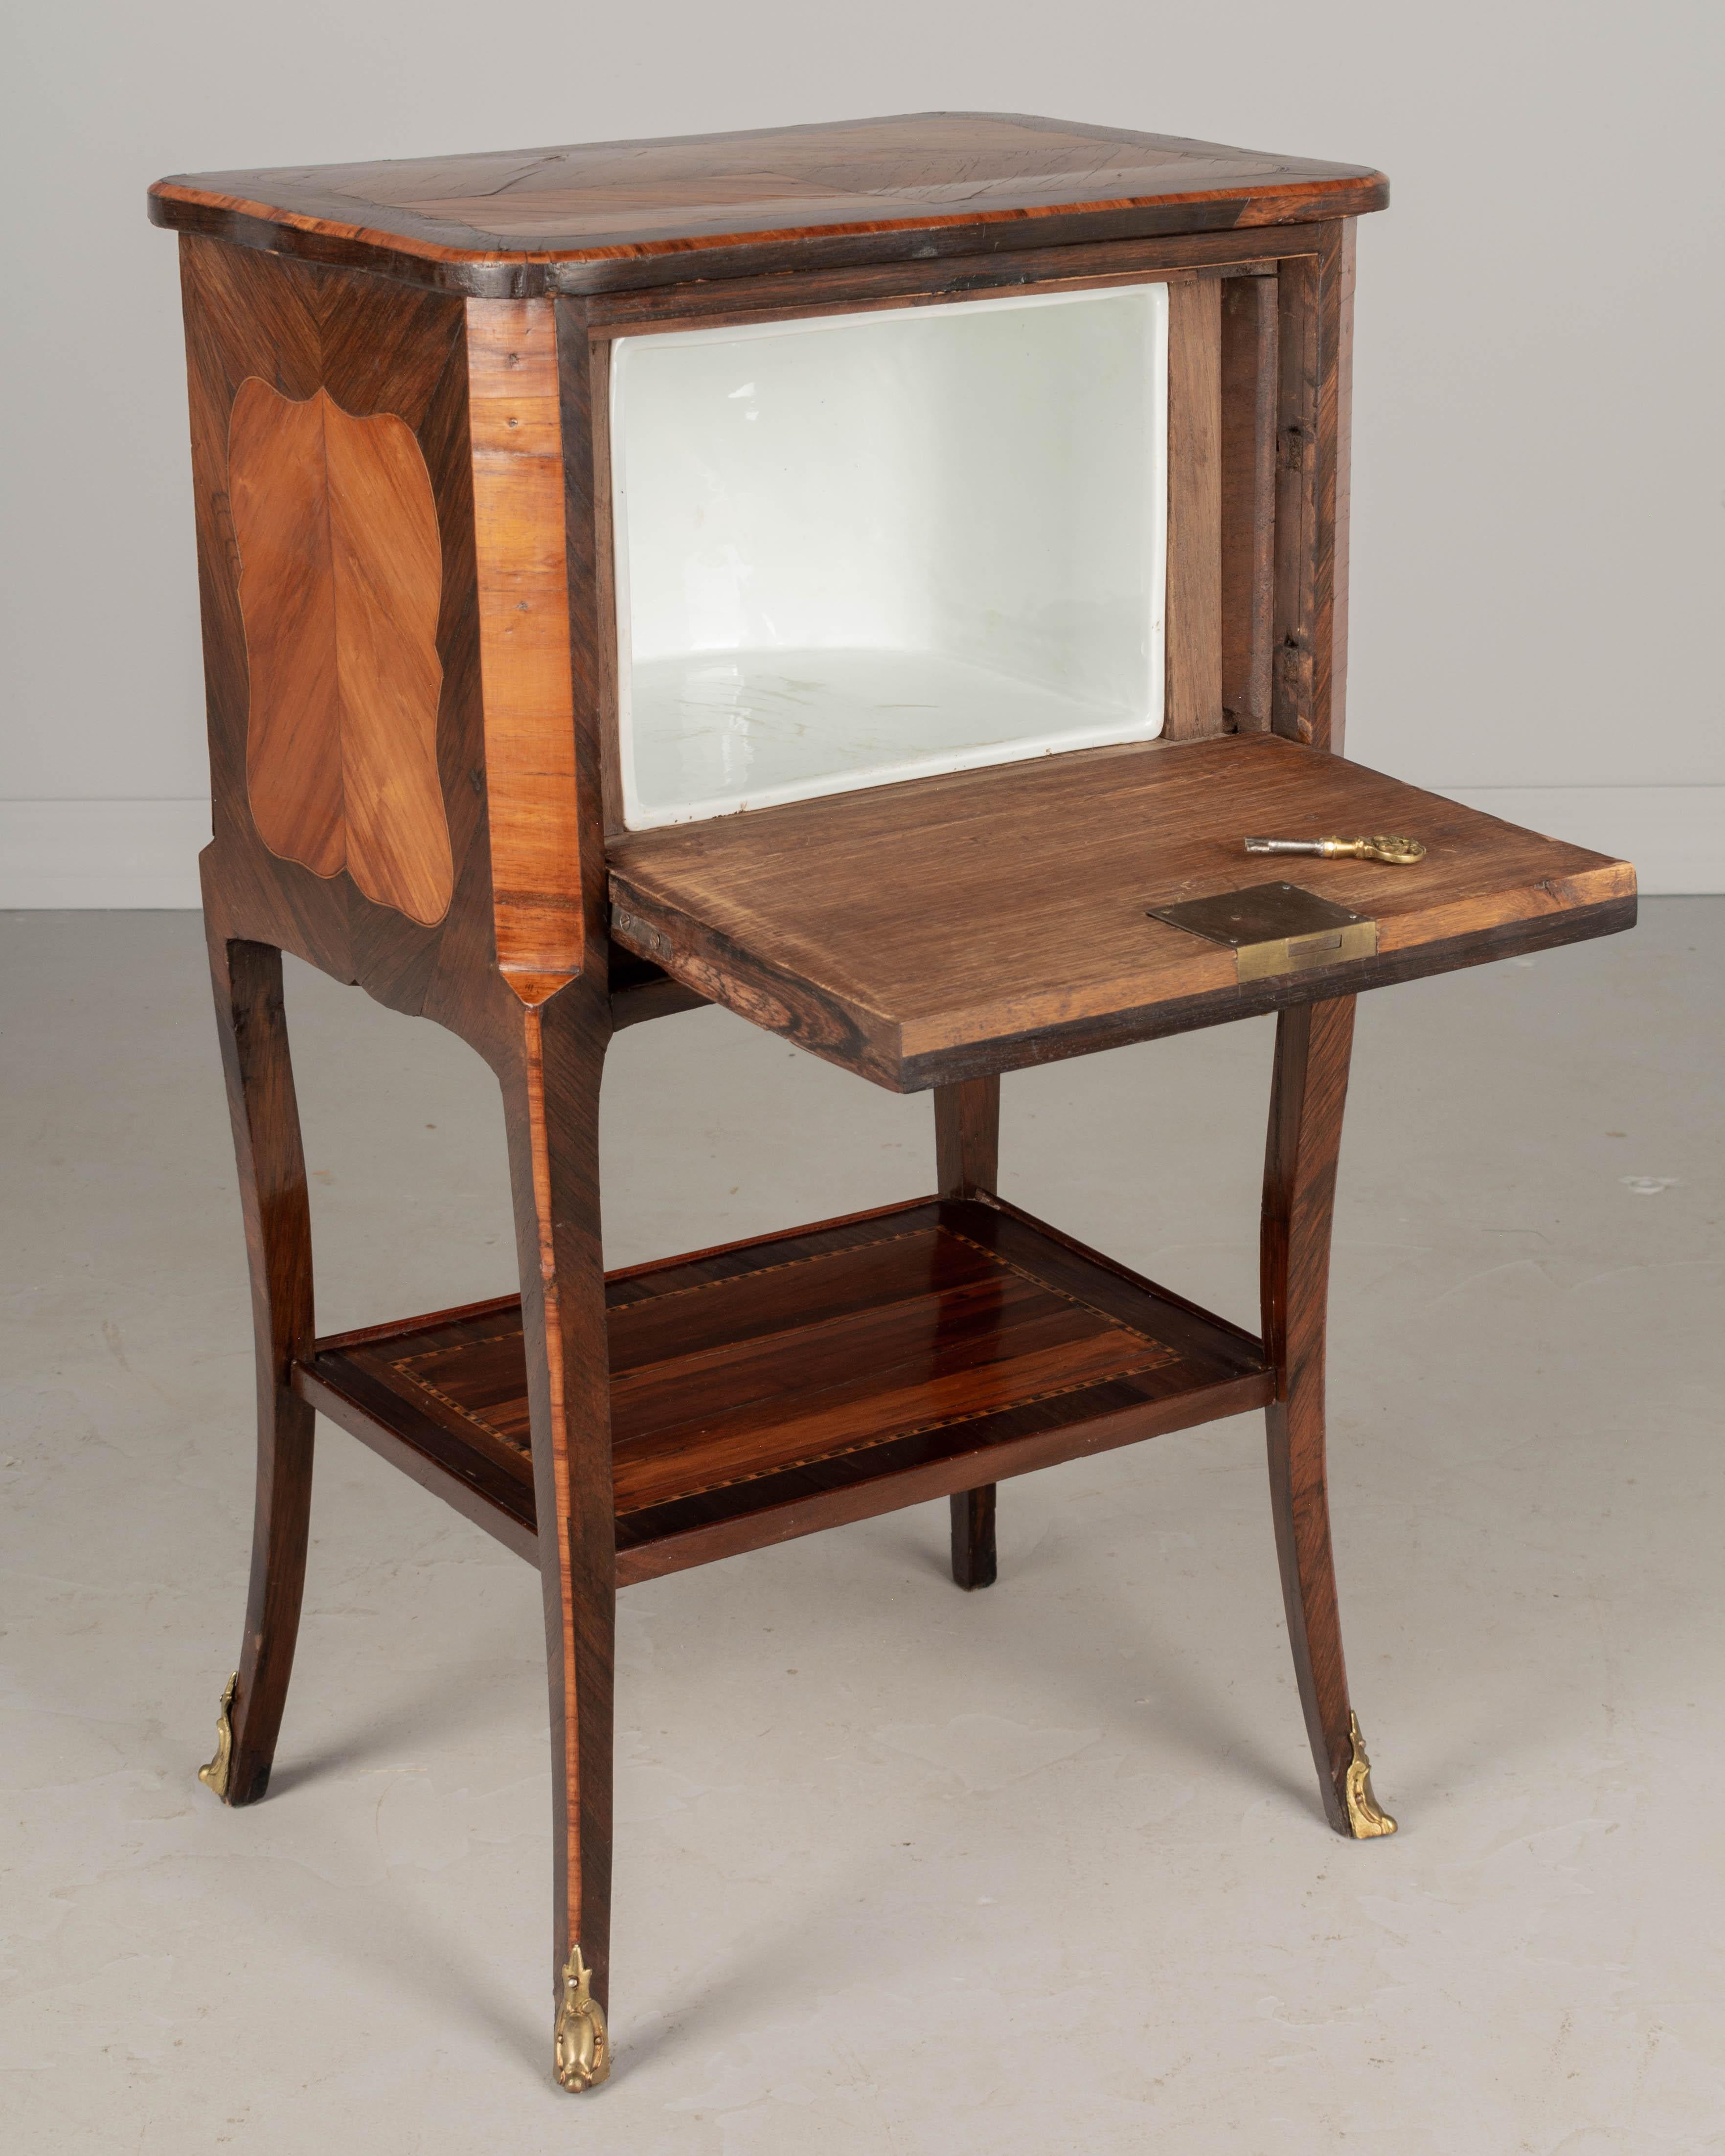 A 19th century Louis XV style French nightstand or side table with inlaid marquetry veneers of walnut and mahogany. Pull down cabinet door with false front made to look like three drawers. Cast bronze hardware with working lock and key. Interior has